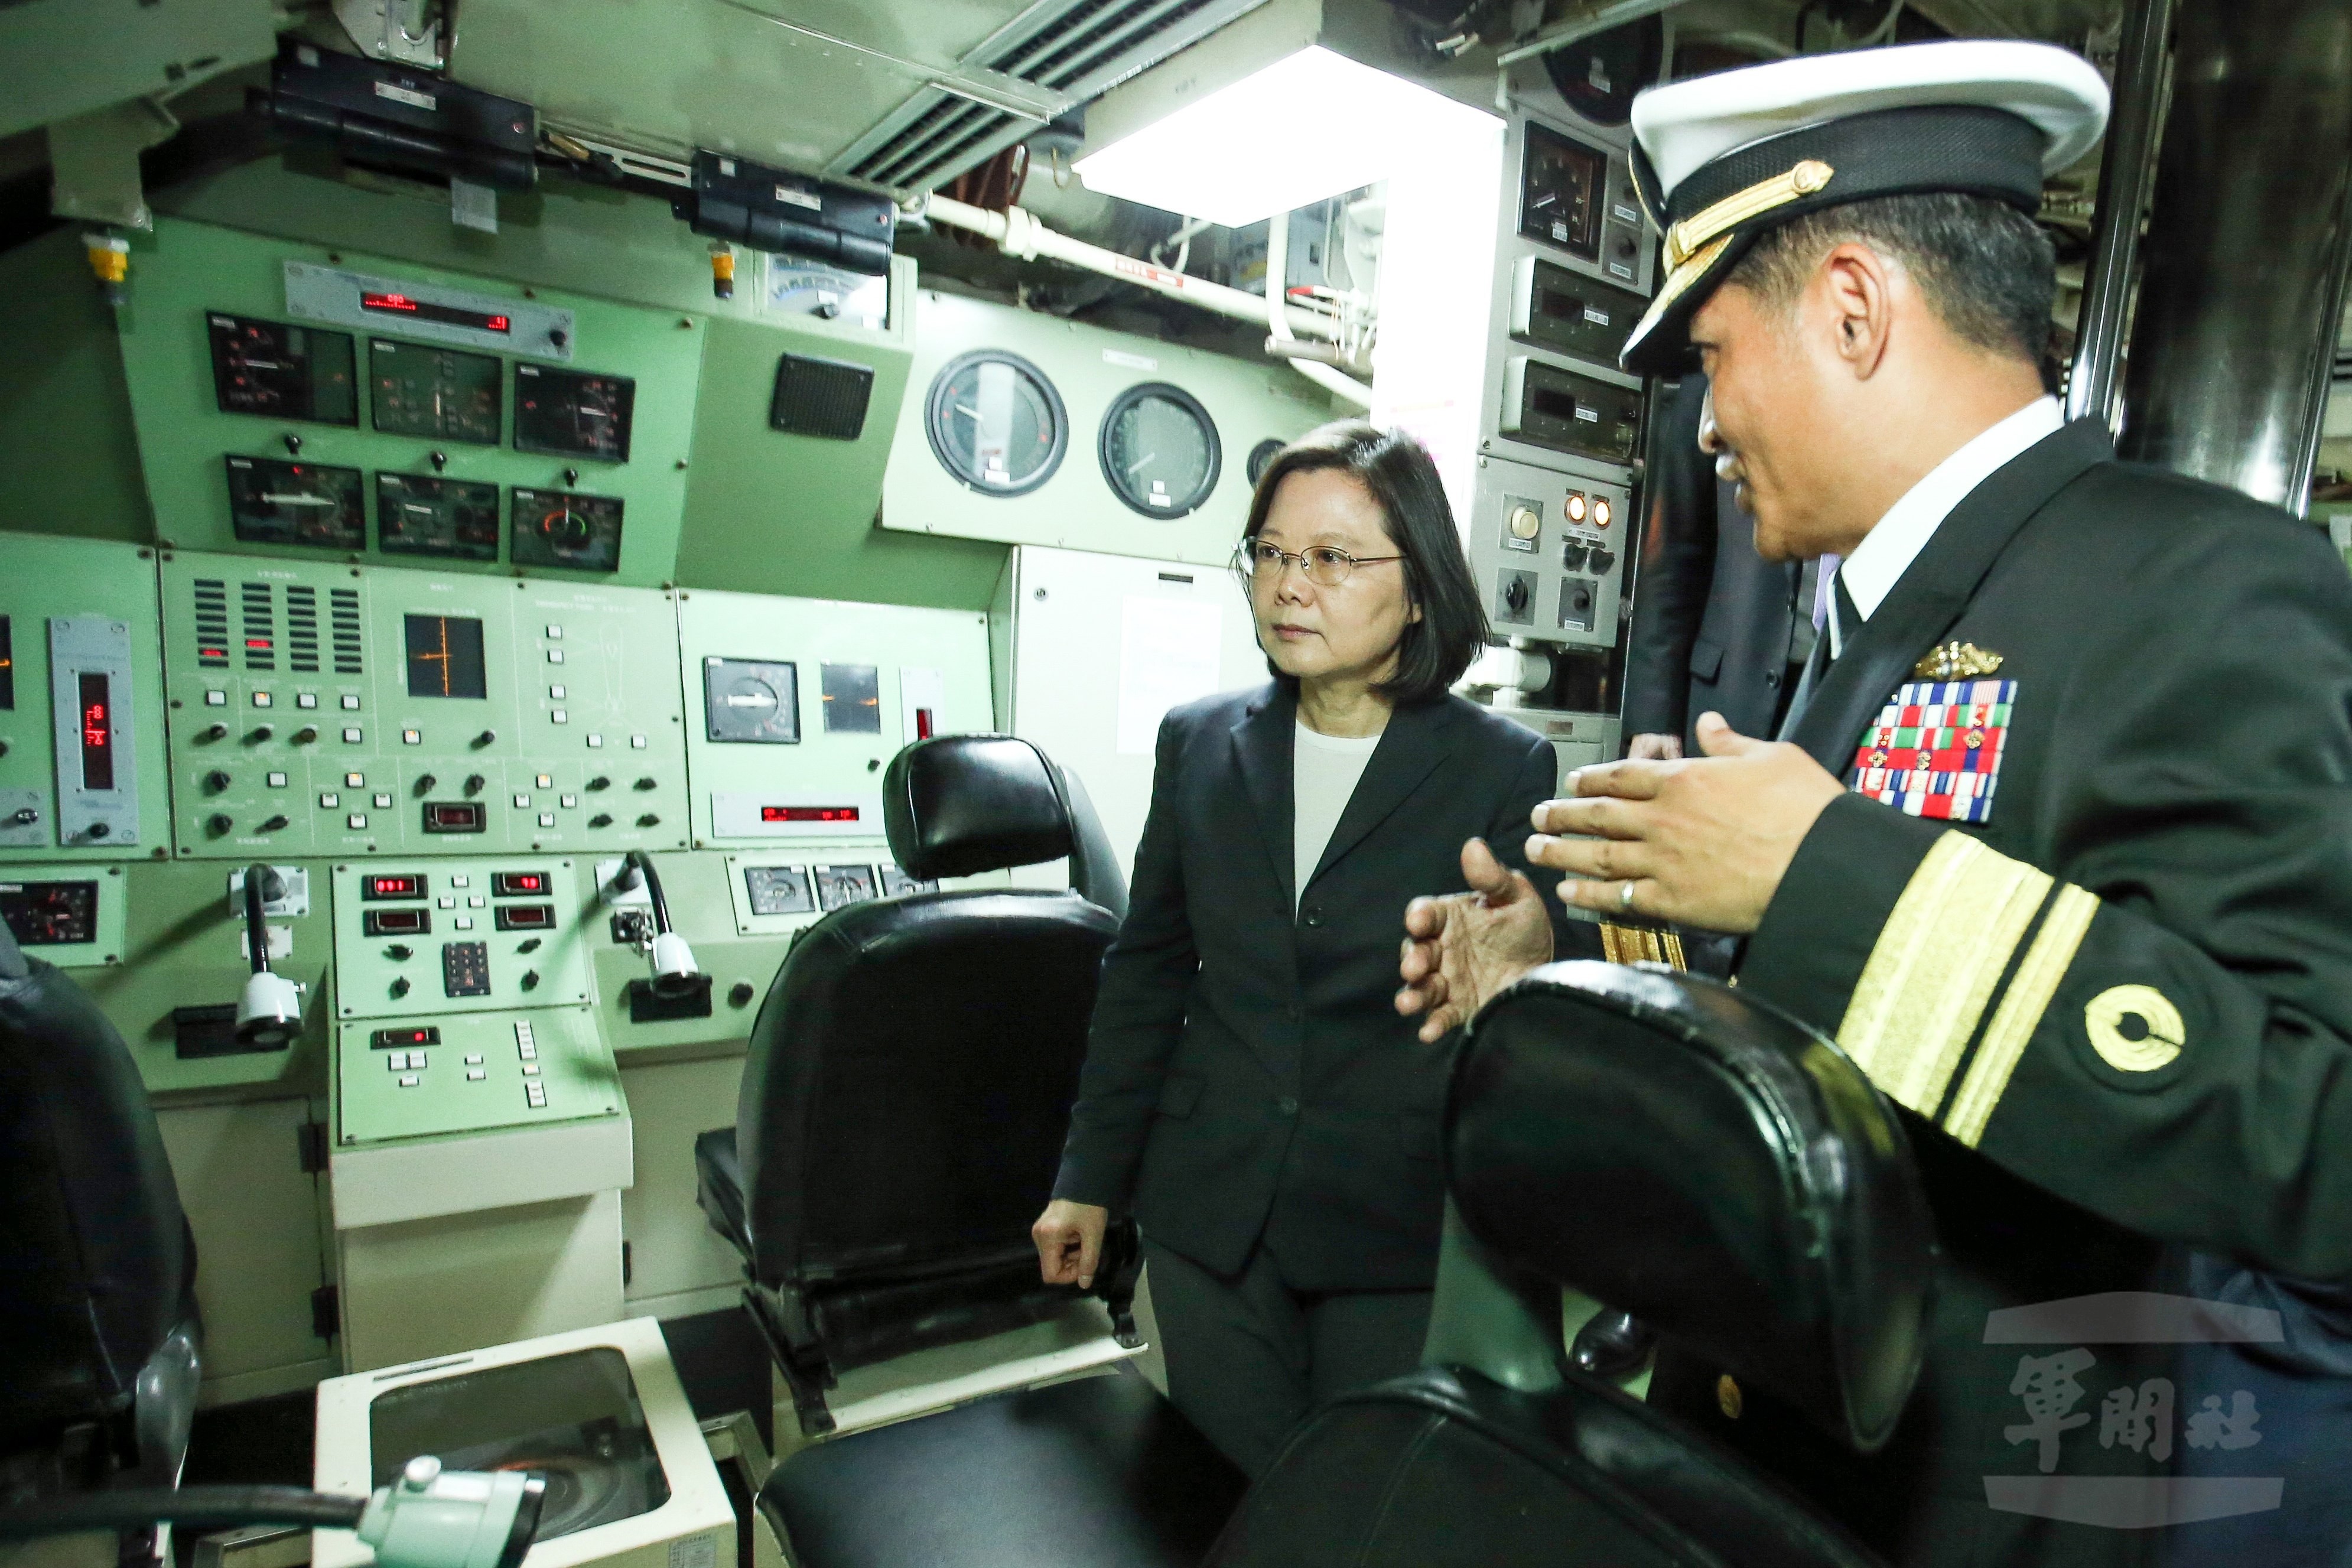 Taiwanese President Tsai Ing-wen inspects the inside of a submarine at the Zuoying naval base in Kaohsiung, Taiwan, in March last year. The Taiwanese government wants to build eight diesel-electric submarines to bolster its four outdated vessels. Photo: EPA / Taiwan Military News Agency handout